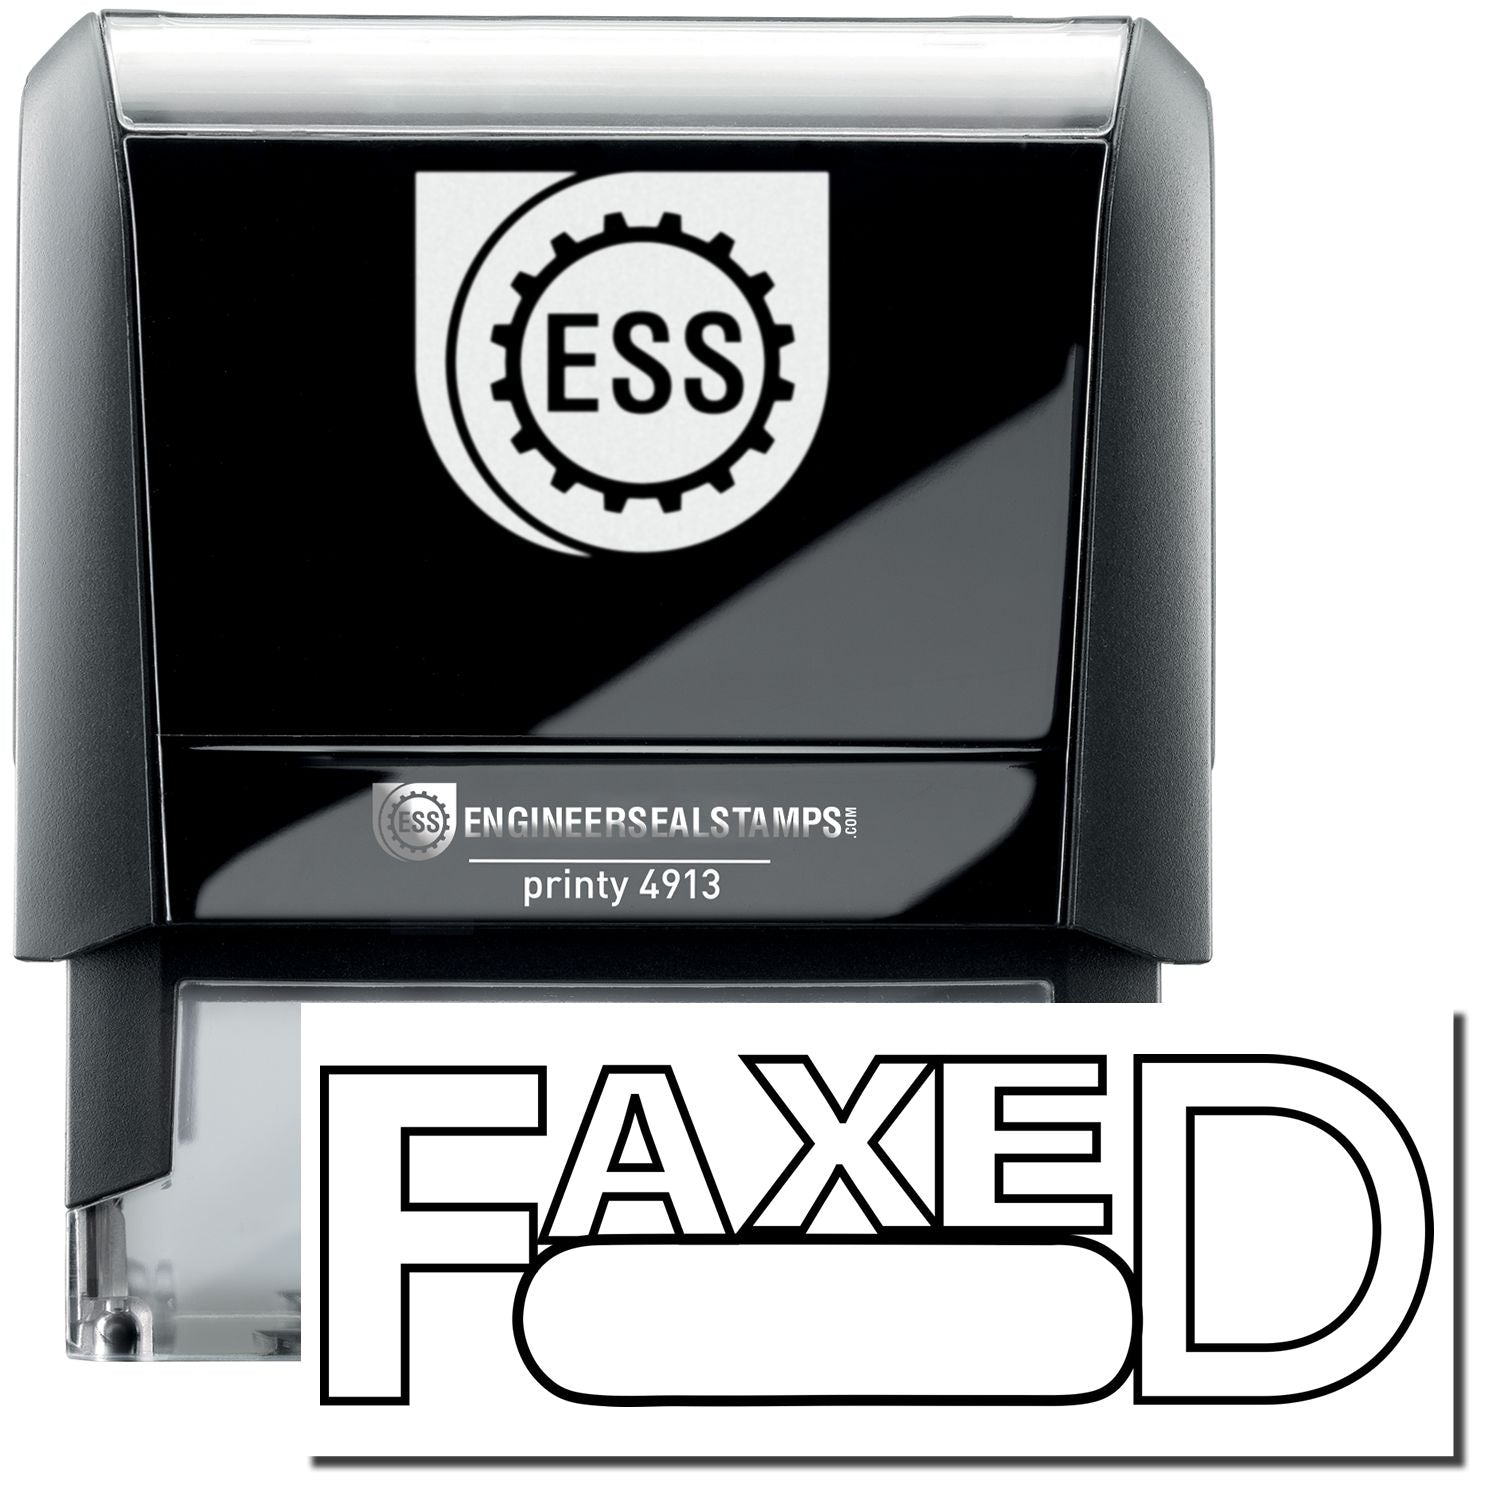 A self-inking stamp with a stamped image showing how the text "FAXED" in an outline style and with a Round Date Box under it is displayed after stamping.